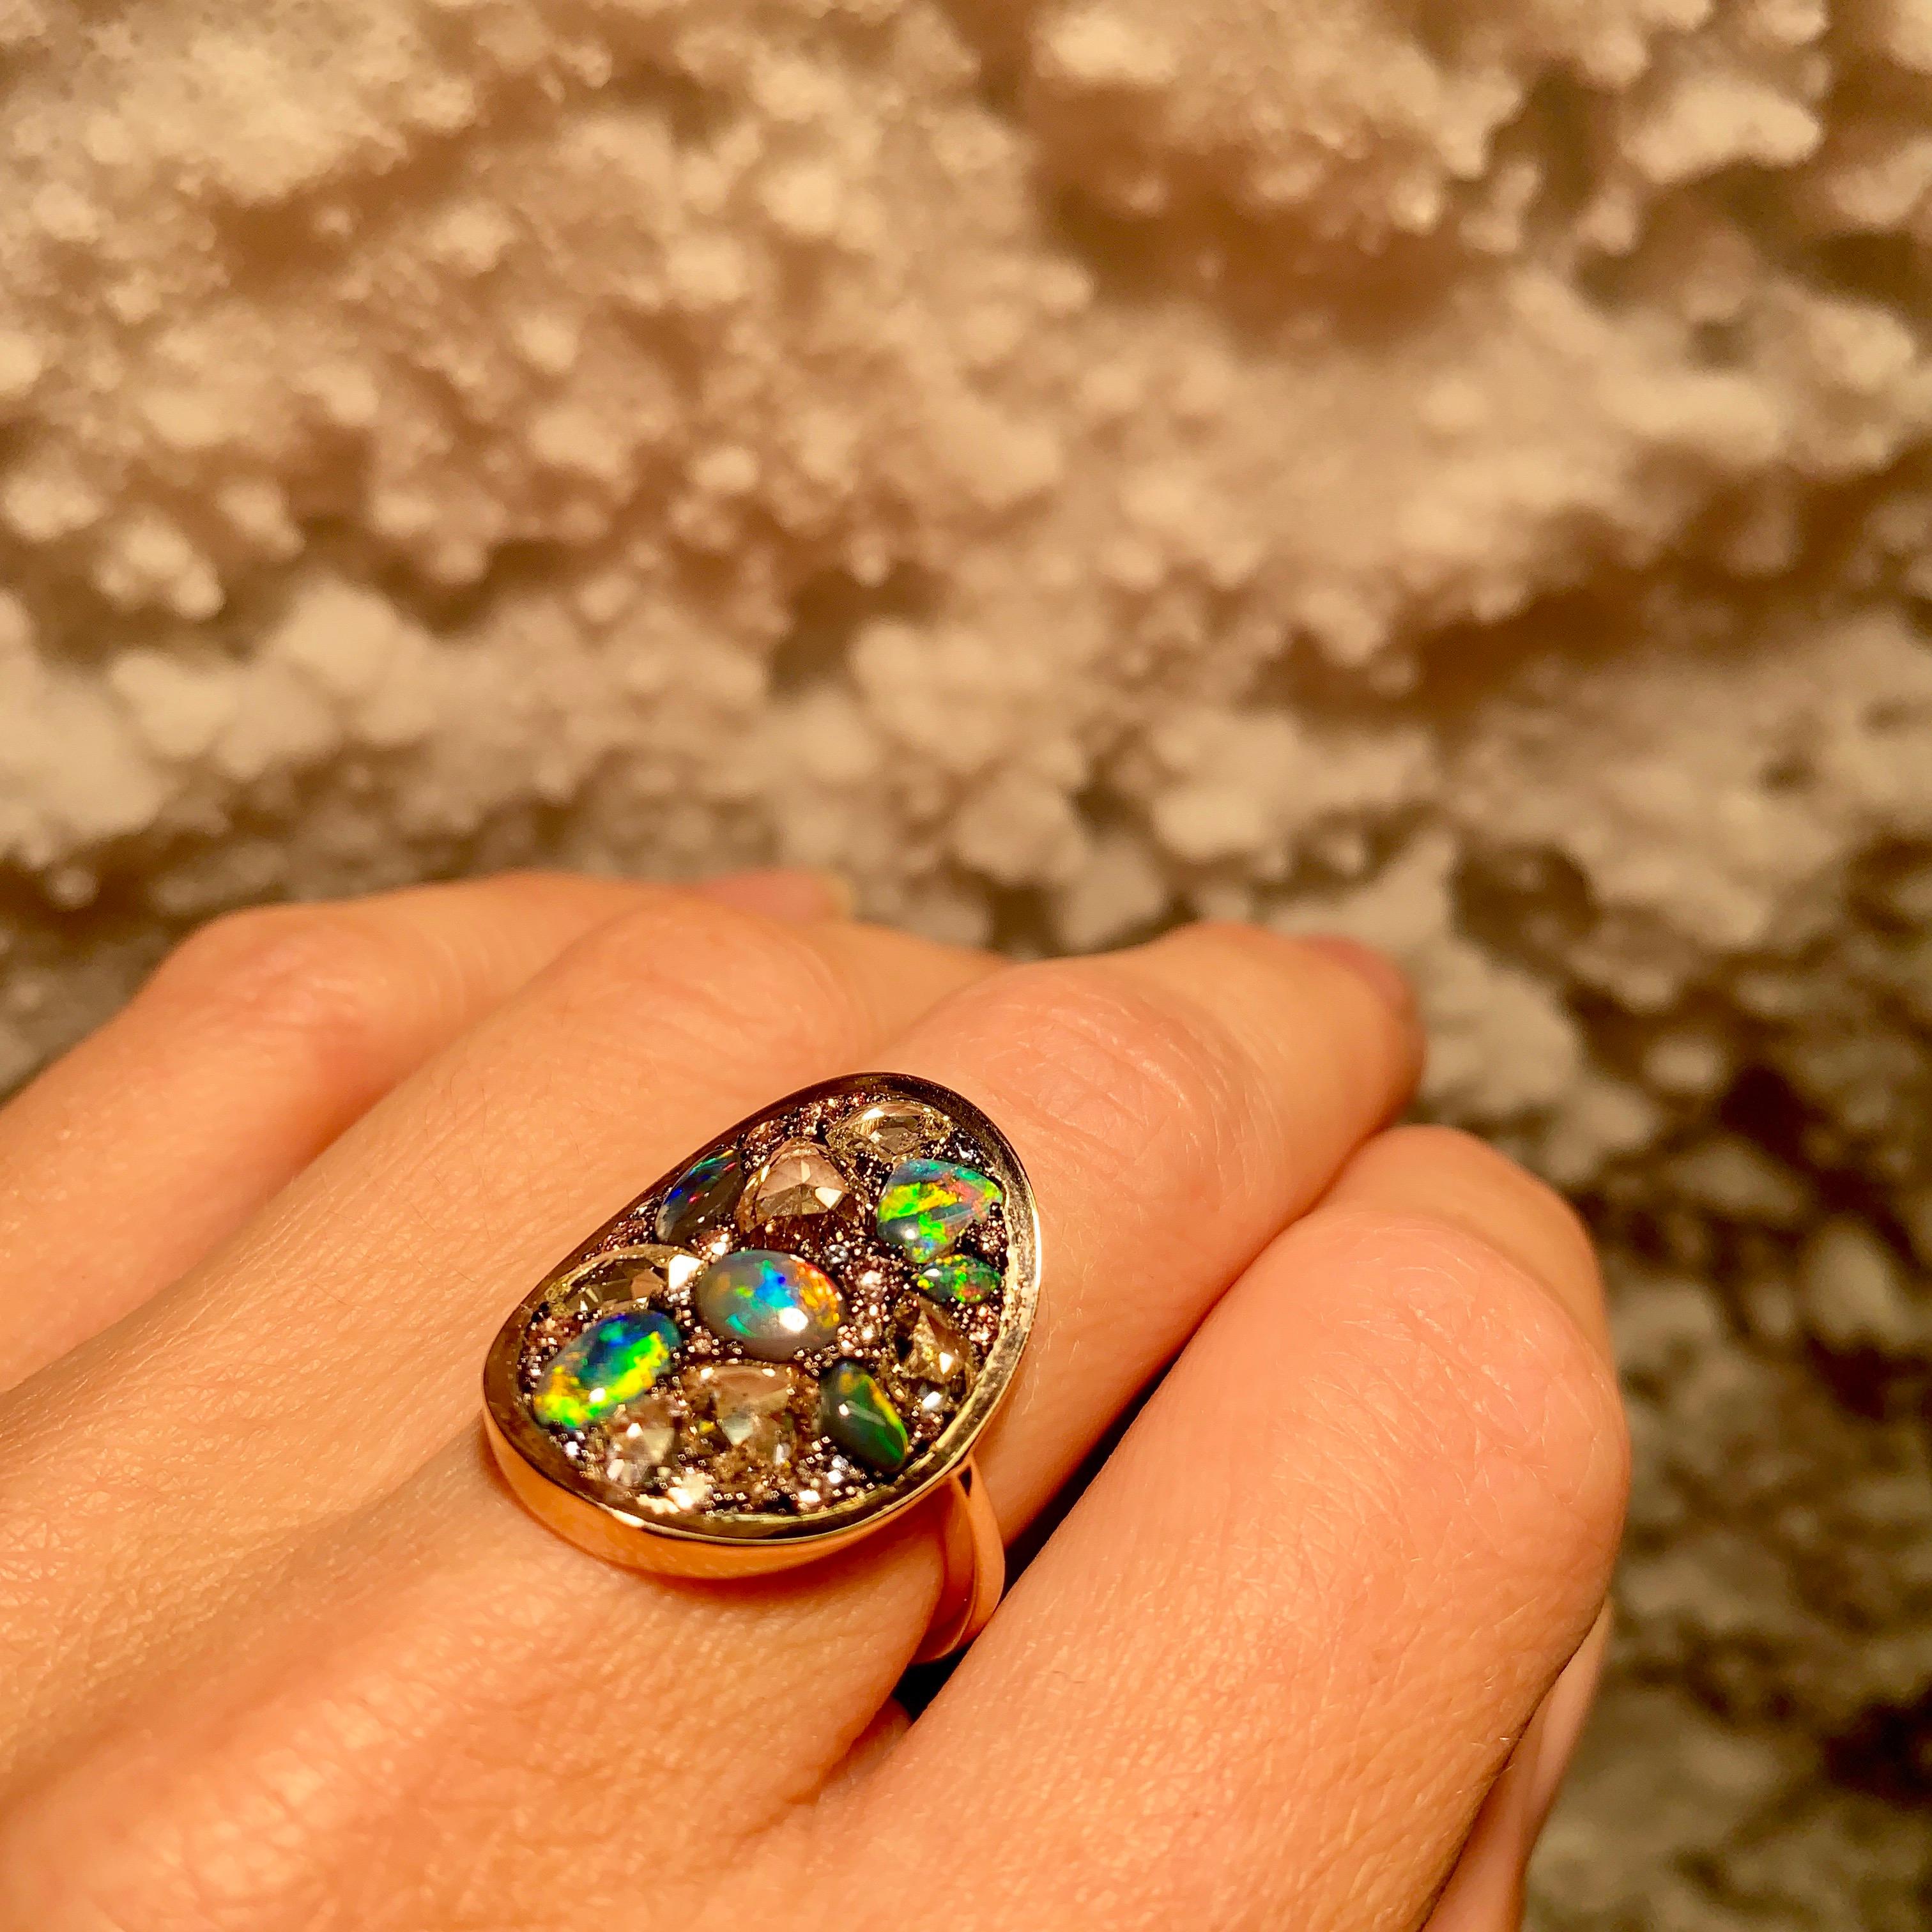 Black Opal, Rose-Cut and Fancy Pink Diamond, Unheated Blue Sapphire Pave Ring 9